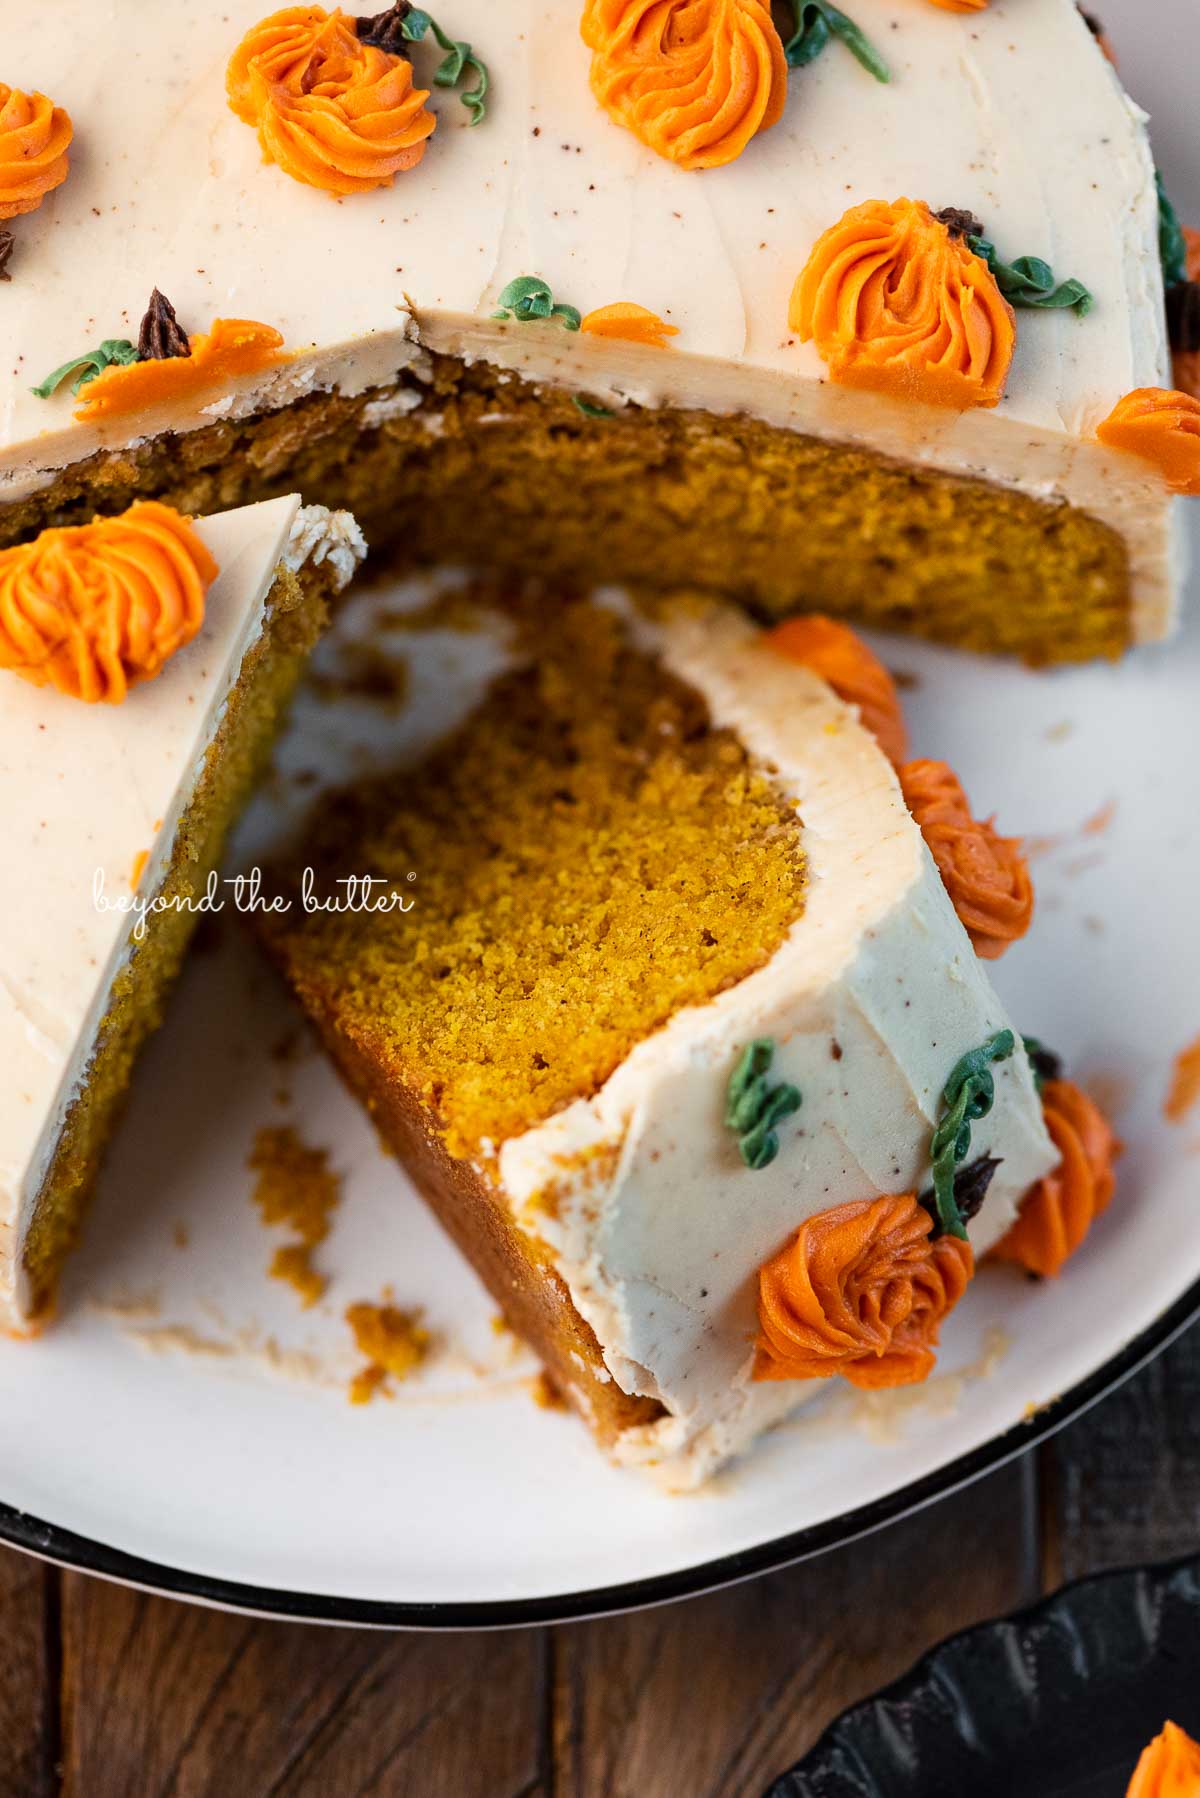 Slices of pumpkin spice cake with espresso buttercream frosting on a black and white dessert plate | © Beyond the Butter®